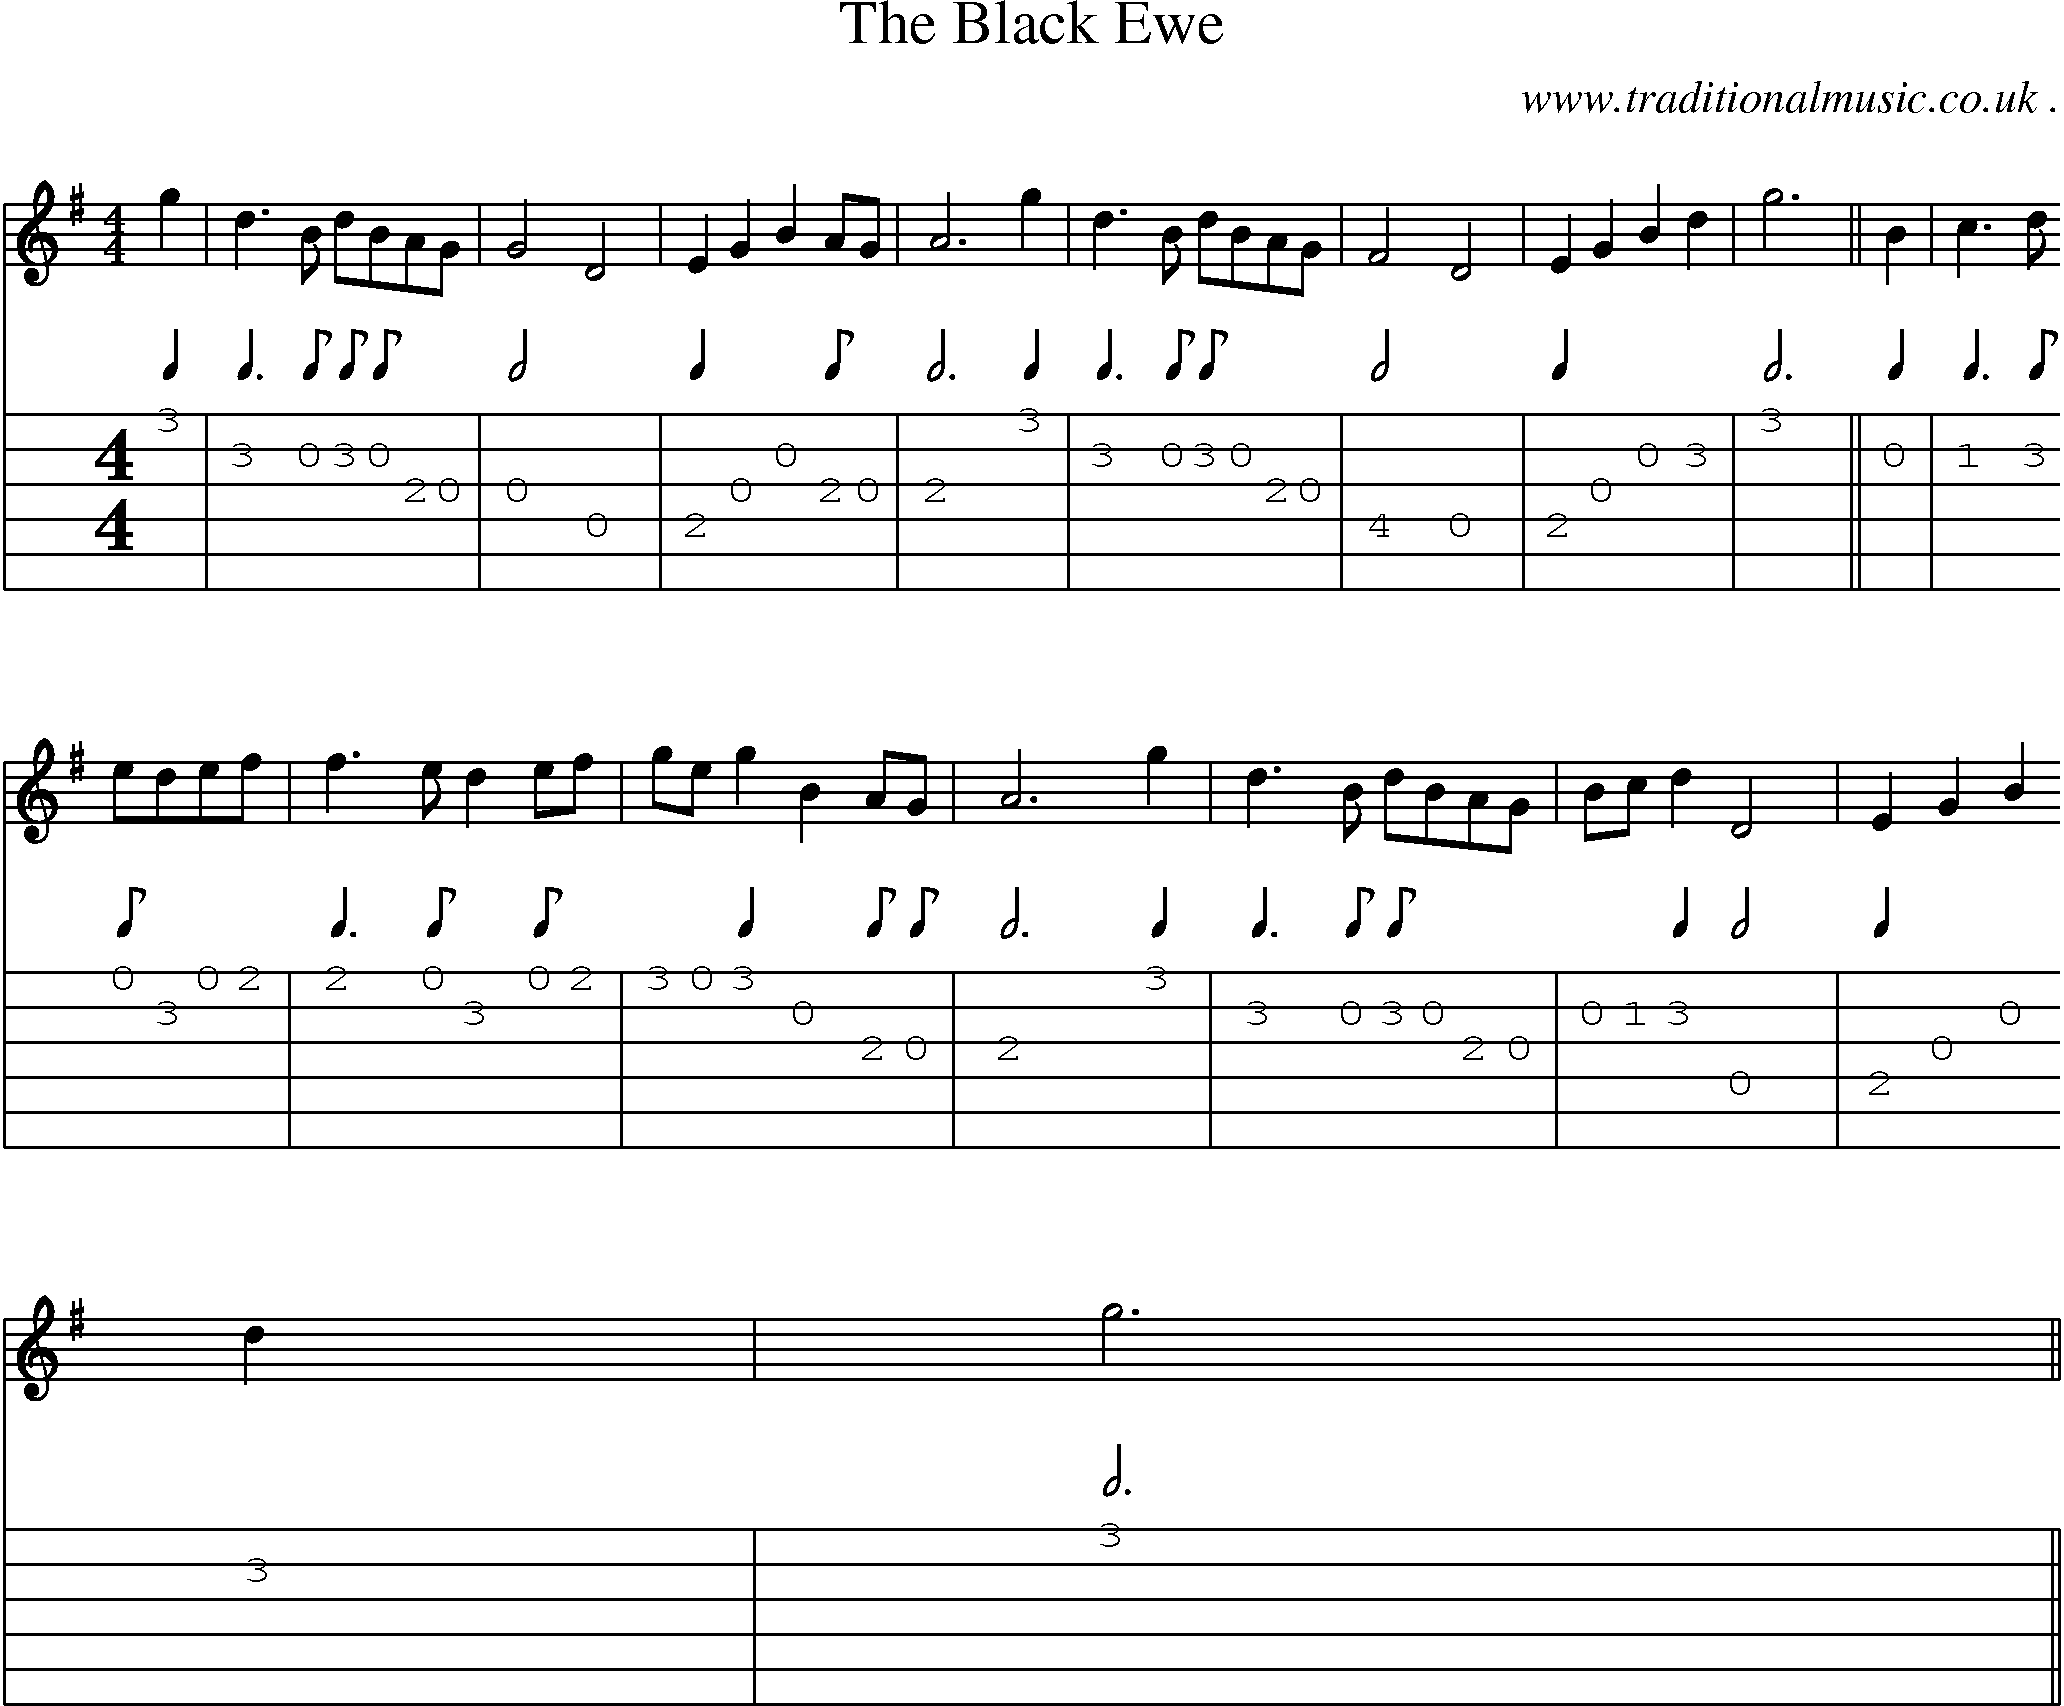 Sheet-Music and Guitar Tabs for The Black Ewe